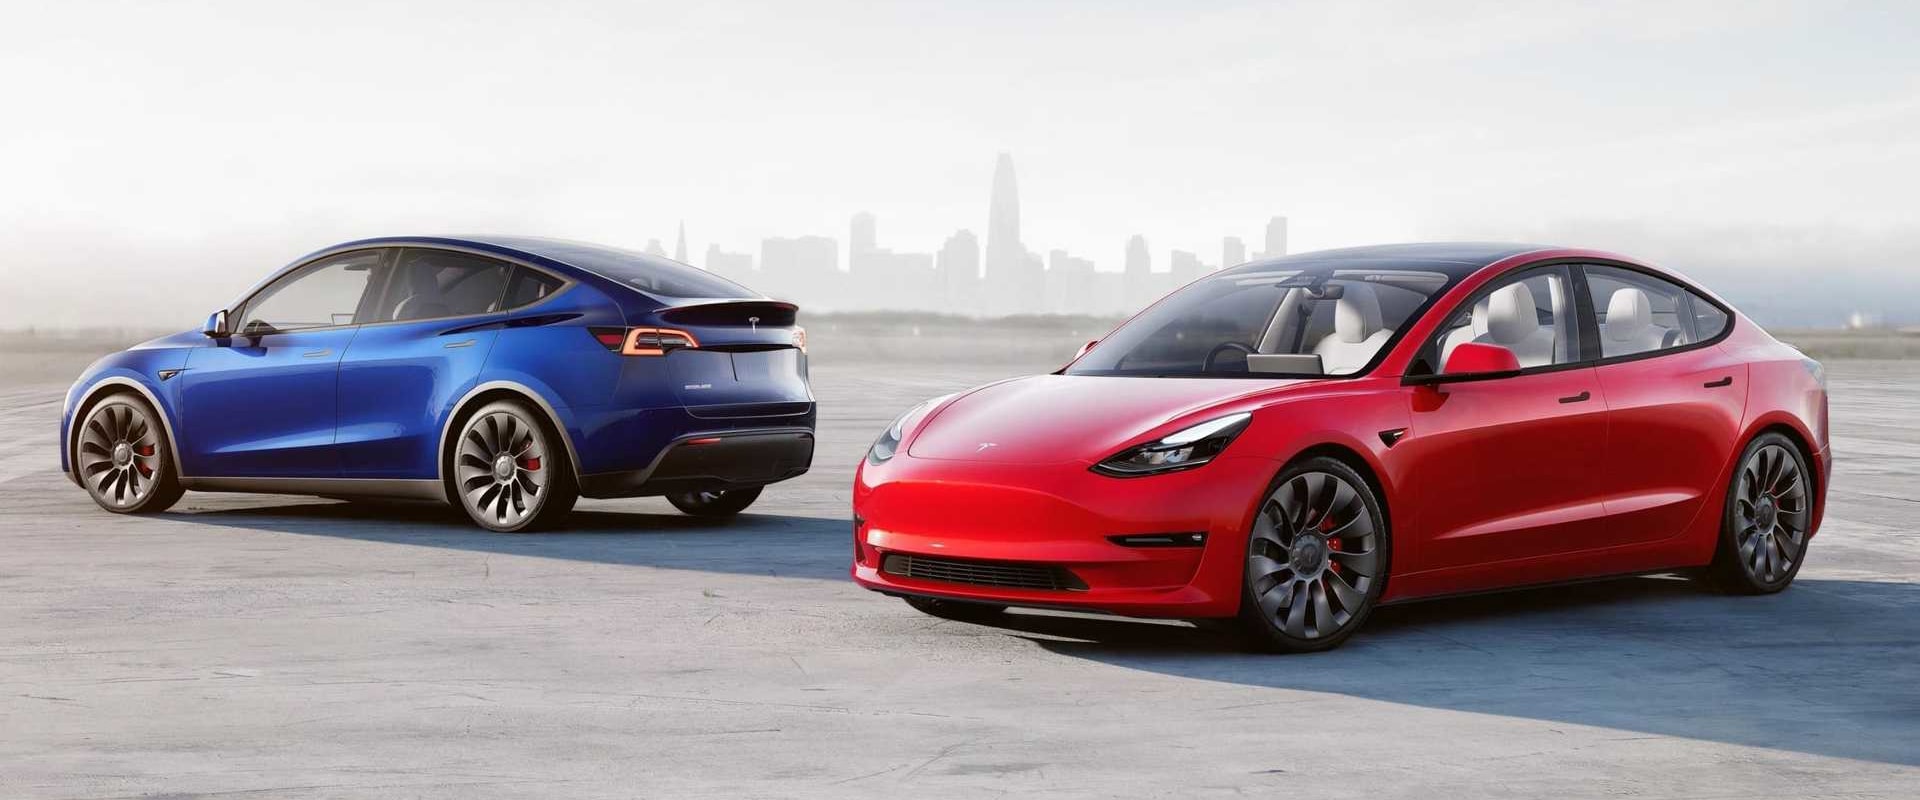 How Much Does a Tesla Electric Car Cost?